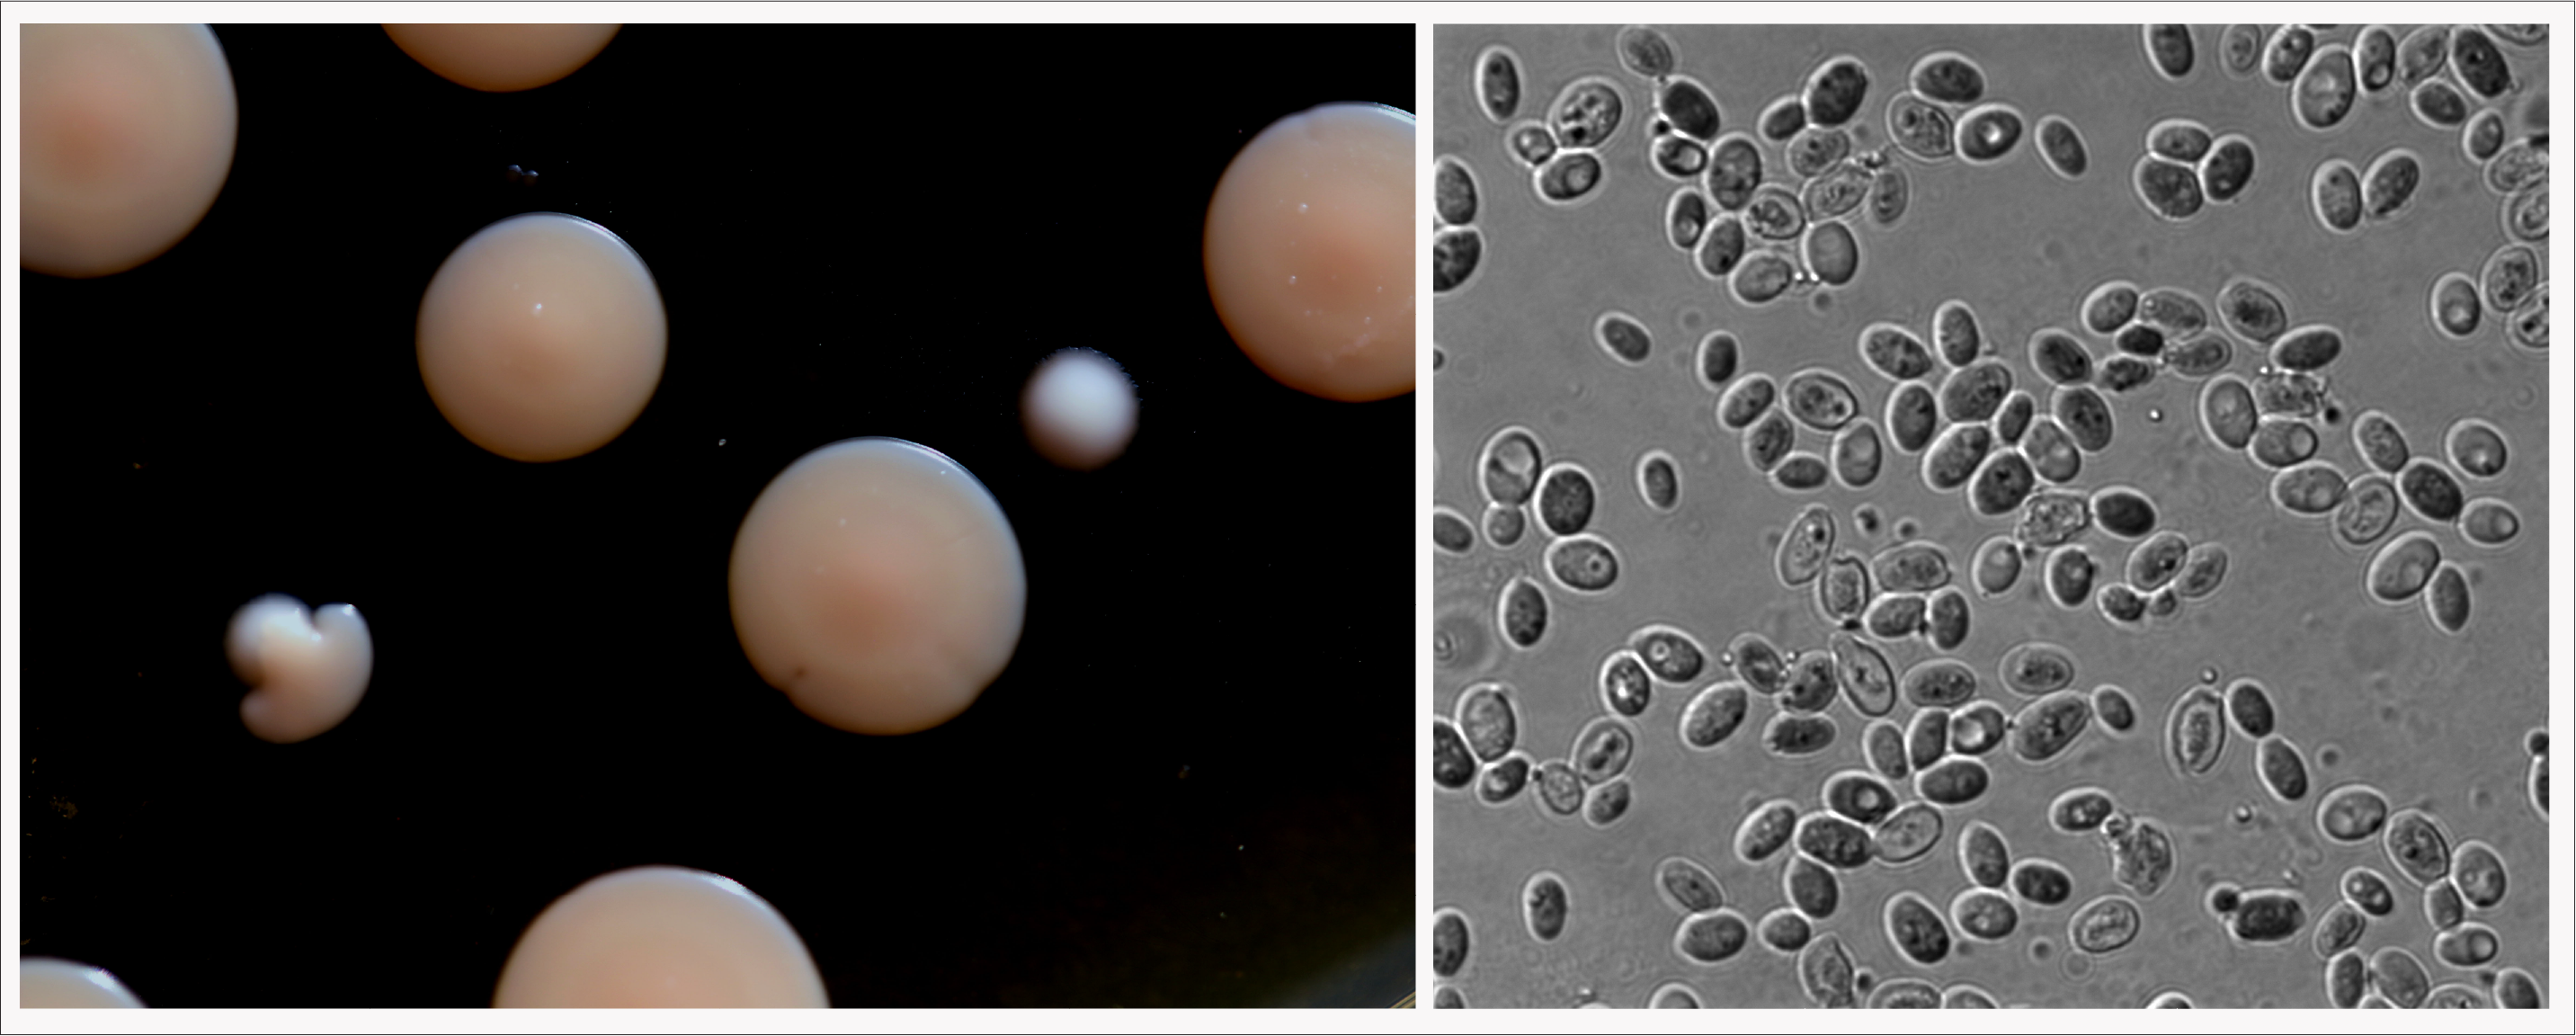 Left: K. barnettii  growing as colonies.  Both the large pink colonies and the small white colonies are K. barnettii  Right: K. barnettii cells at magnification.